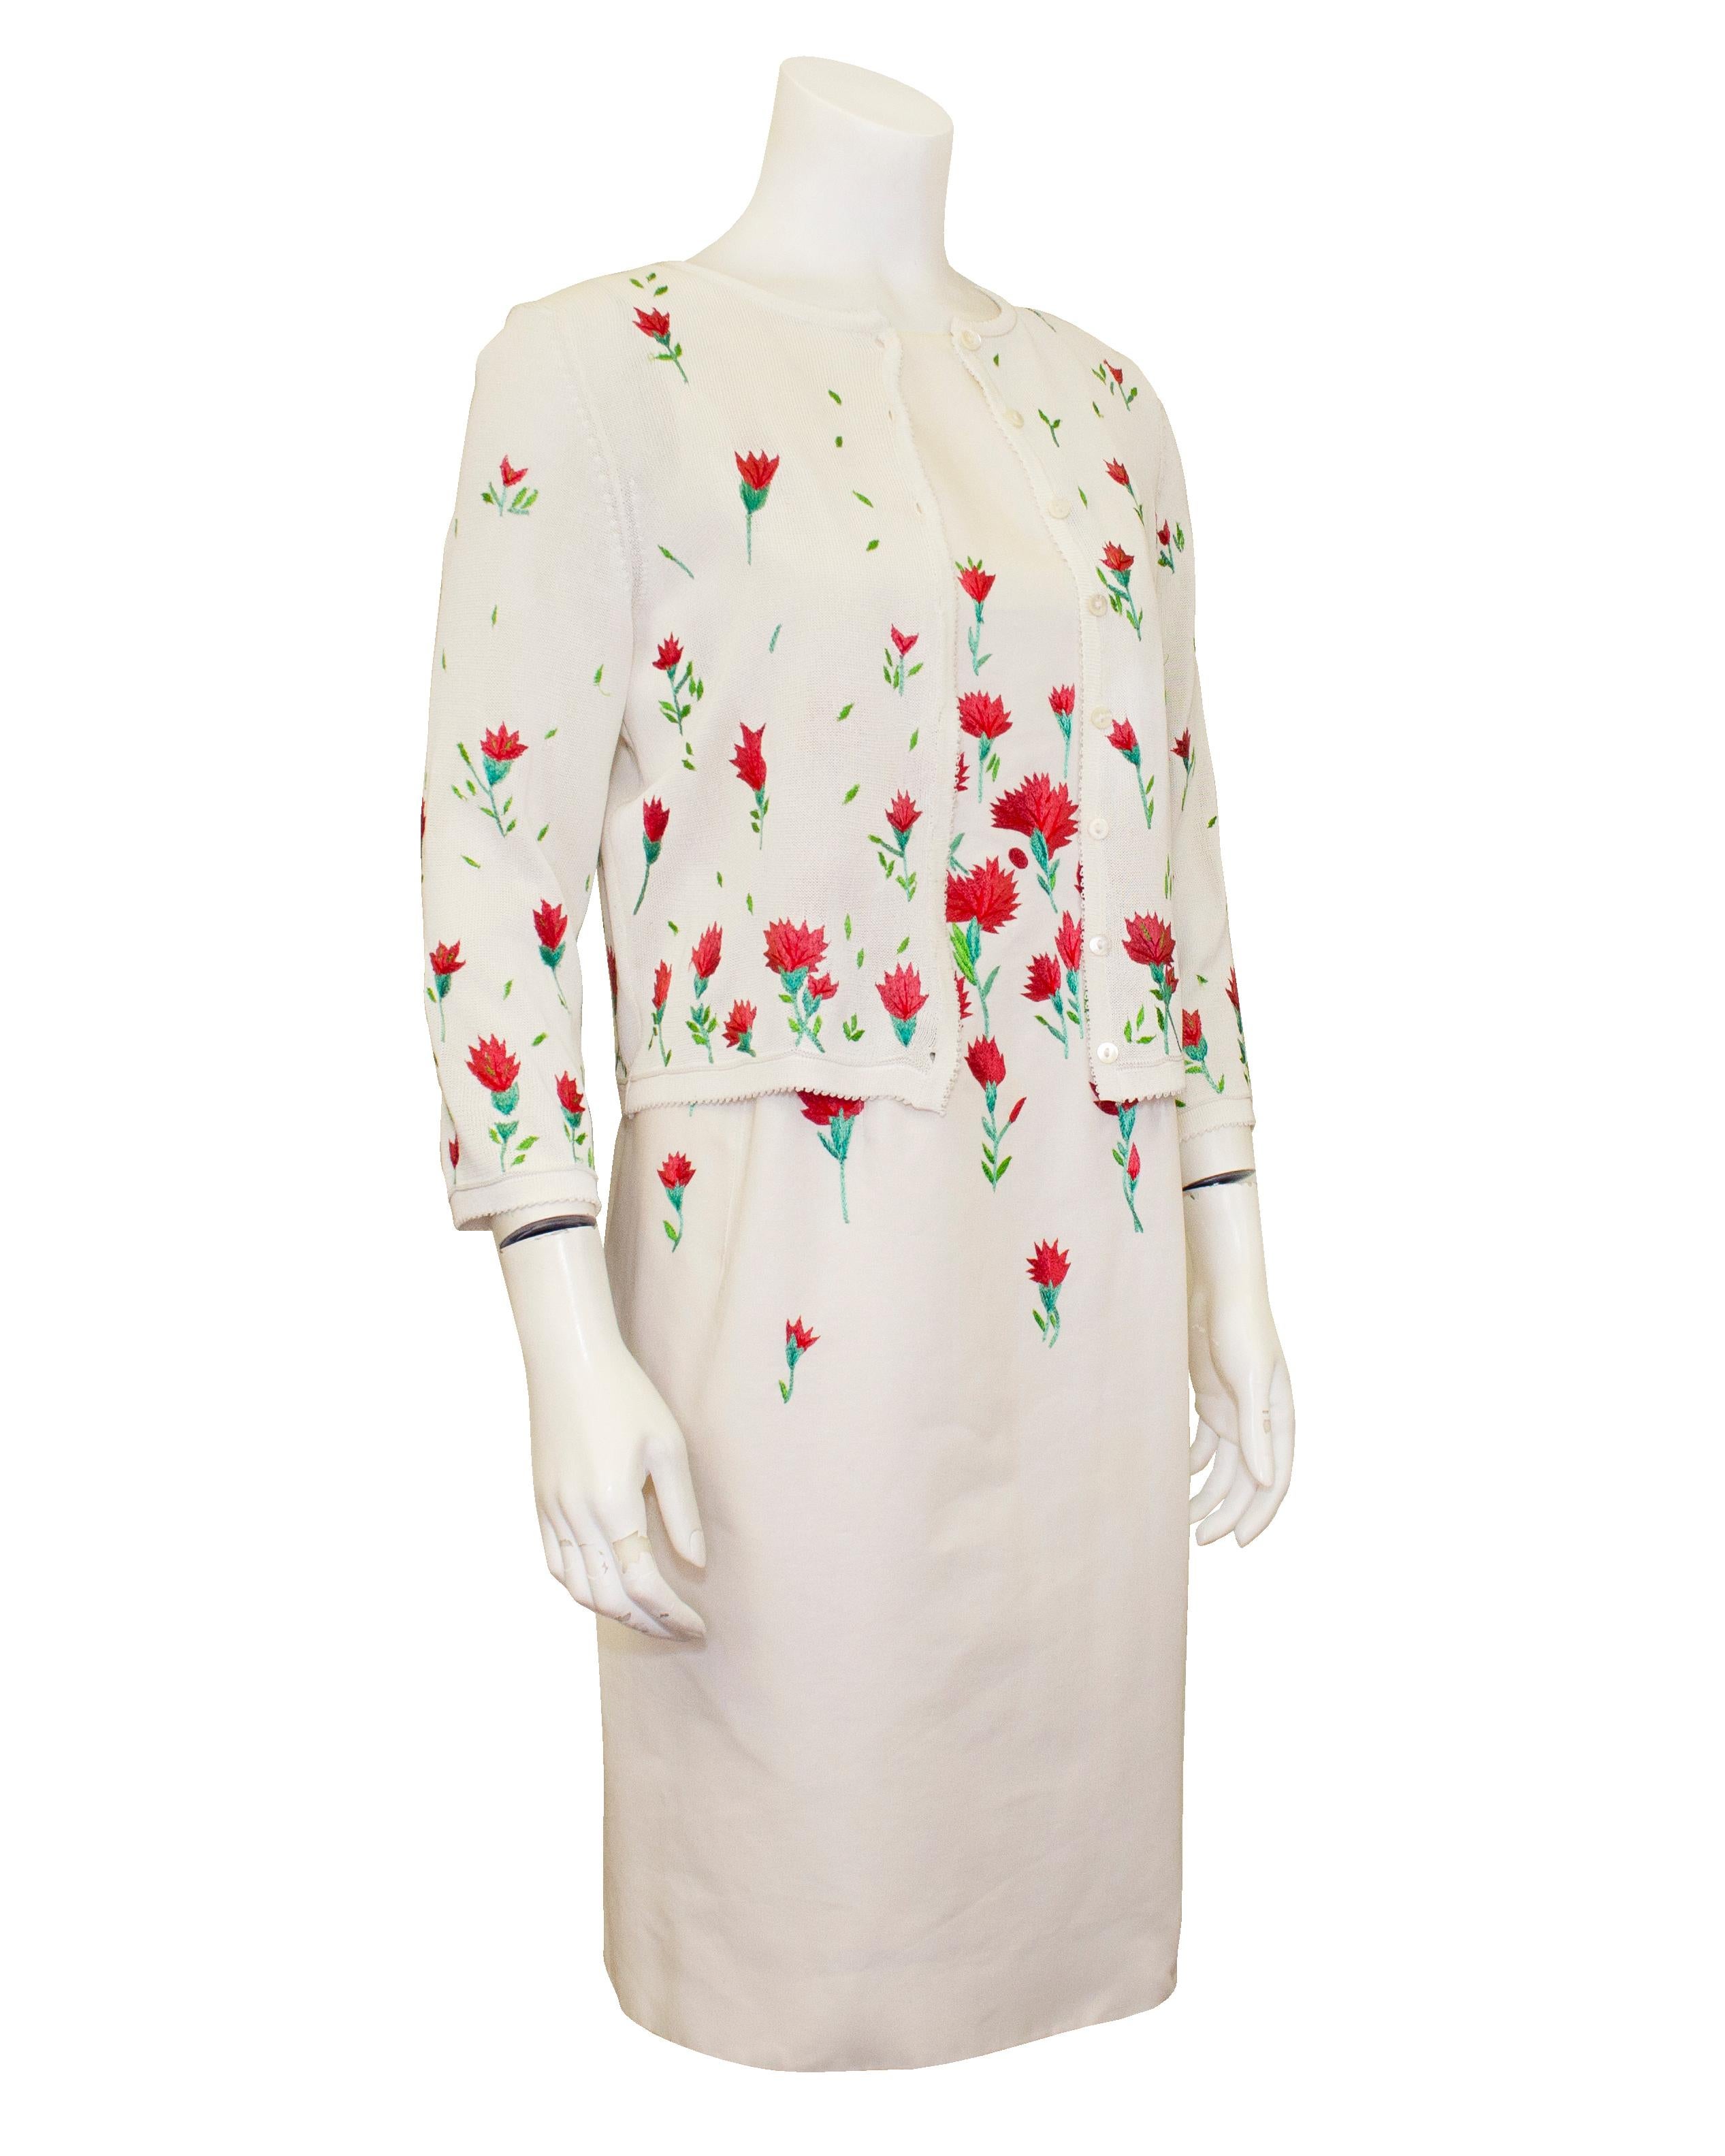 Extremely elegant Oscar de la Renta dress and cardigan ensemble from the the 2000s. Sleeveless, boatneck white cotton twill dress with beautiful embroidered pink, red and green carnations through at the waist, bust and hips. Lovely seam work